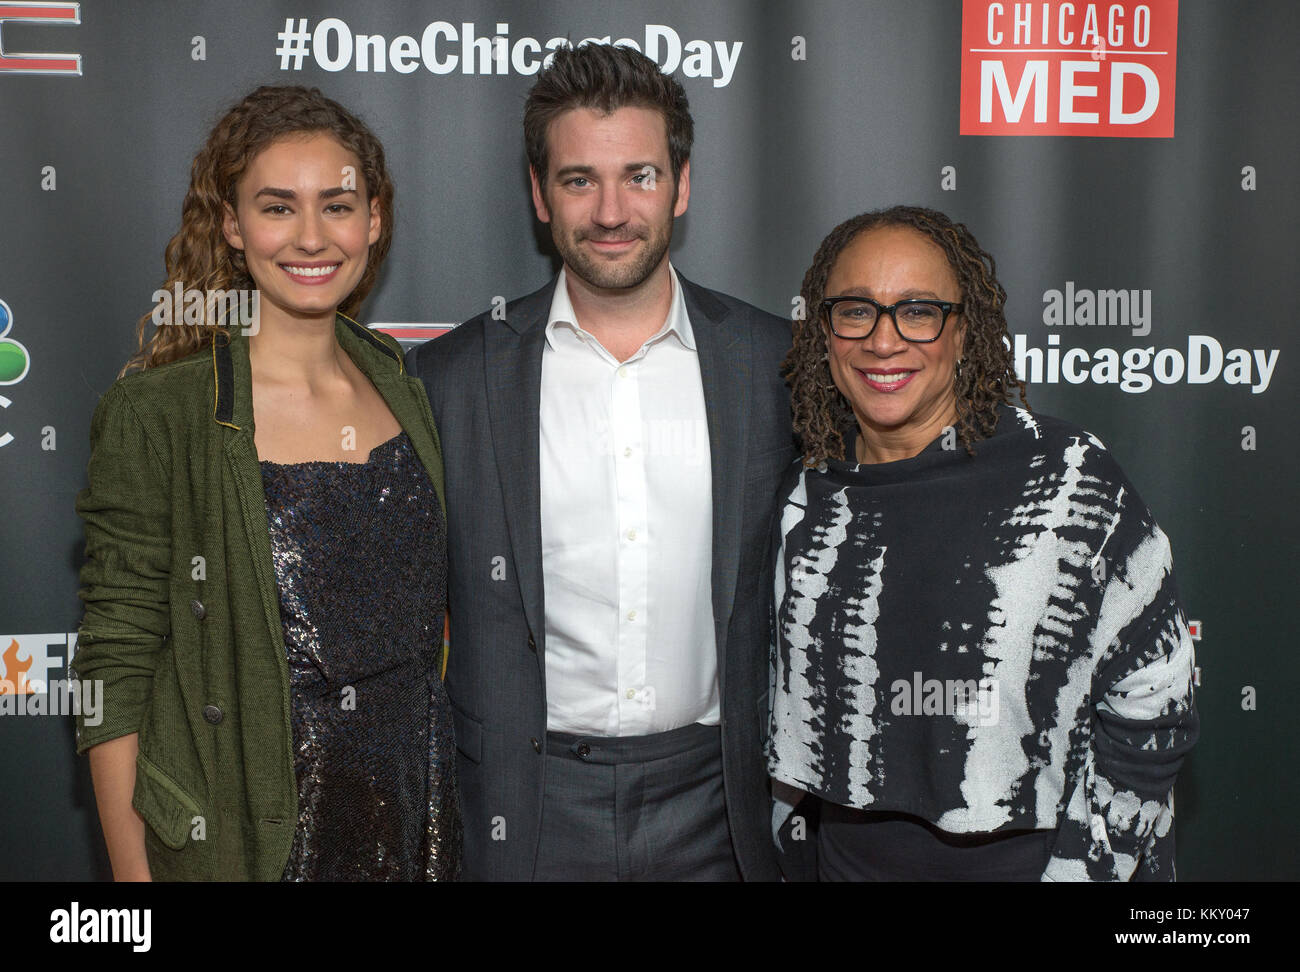 3rd annual NBC One Chicago Party featuring cast members from Chicago Fire, Chicago Med and Chicago P.D - Arrivals  Featuring: Rachel DiPillo, Colin Donnell, S. Epatha Merkerson Where: Chicago, Illinois, United States When: 30 Oct 2017 Credit: WENN Stock Photo